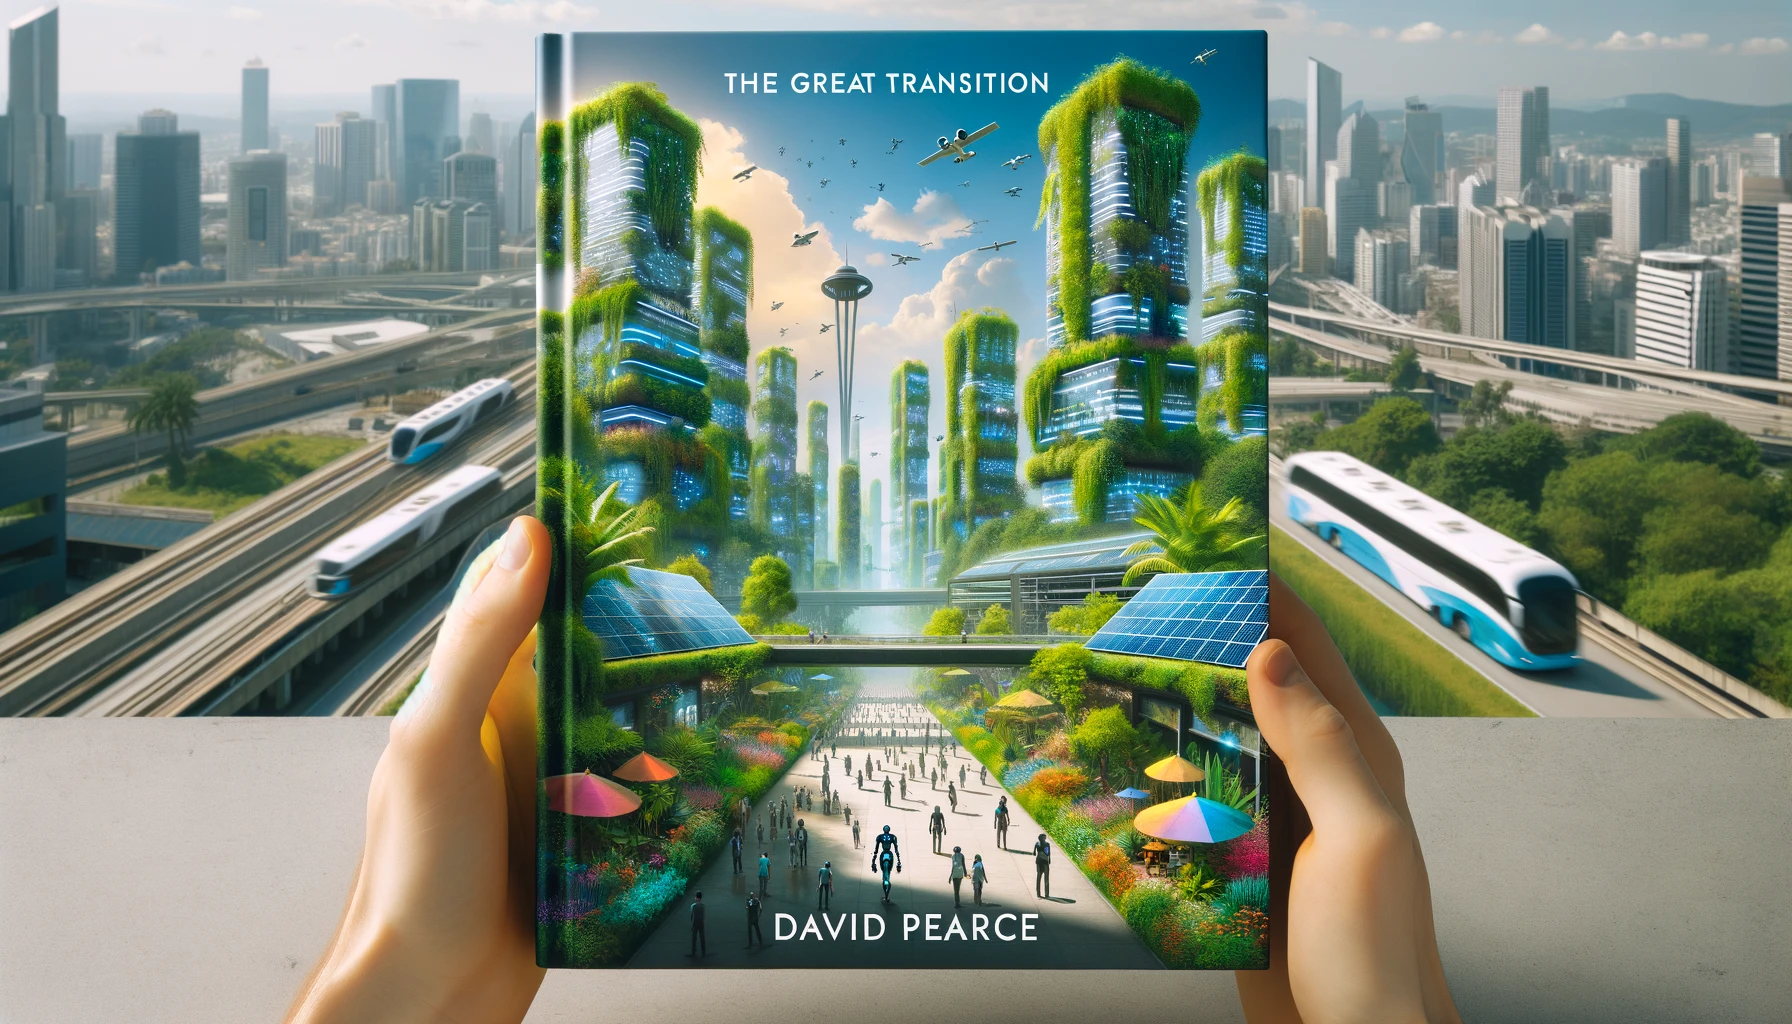 The Great Transition by David Pearce